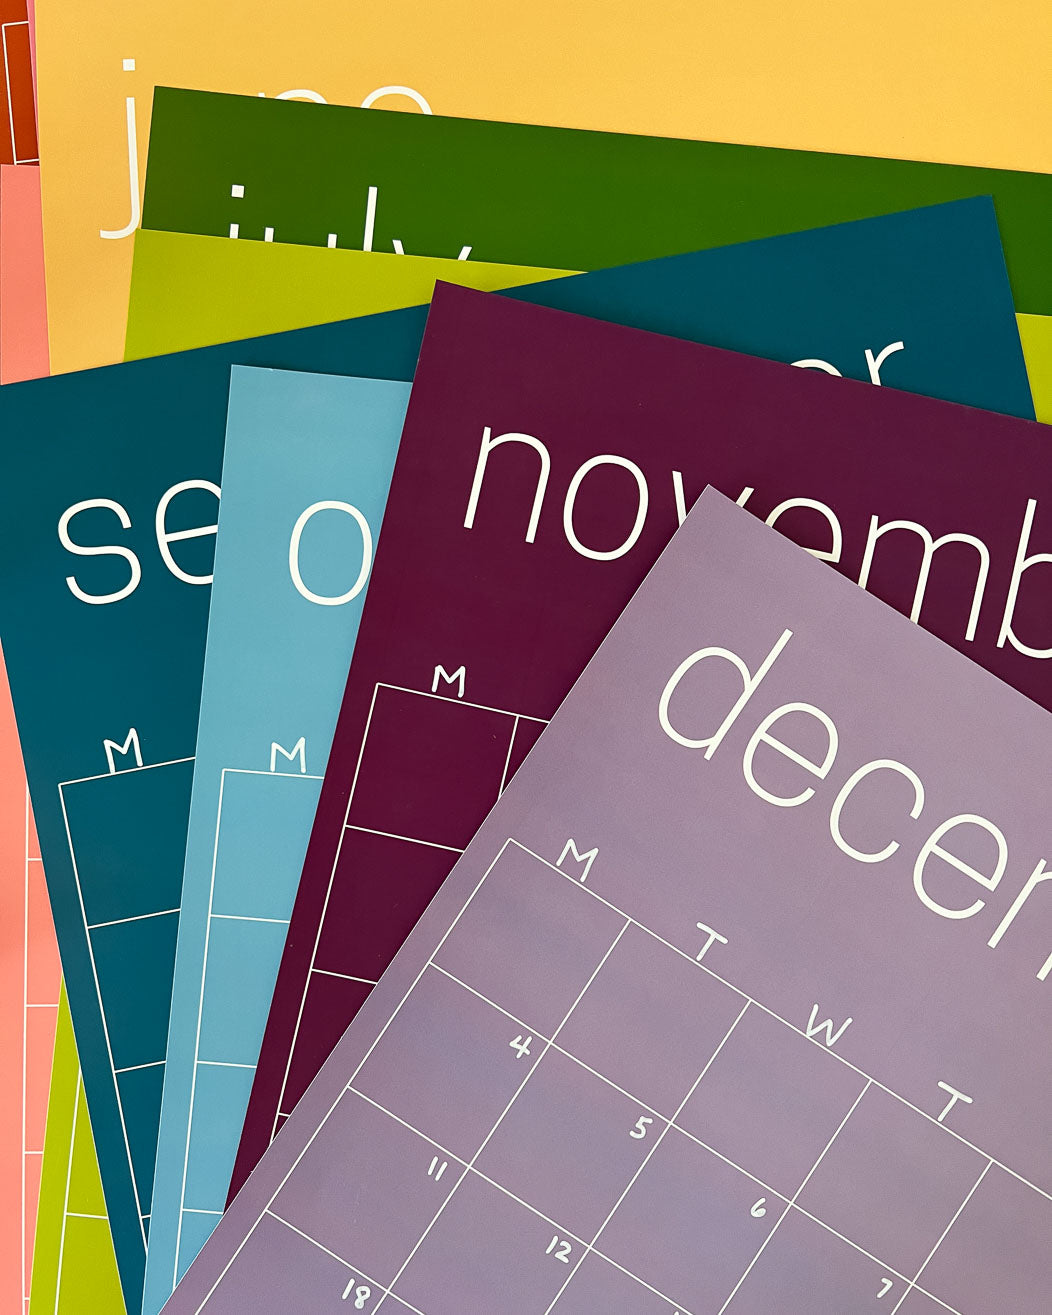 Slightly Imperfect Reusable Large Wall Calendar in Rainbow- Save 50% with code IMPERFECT